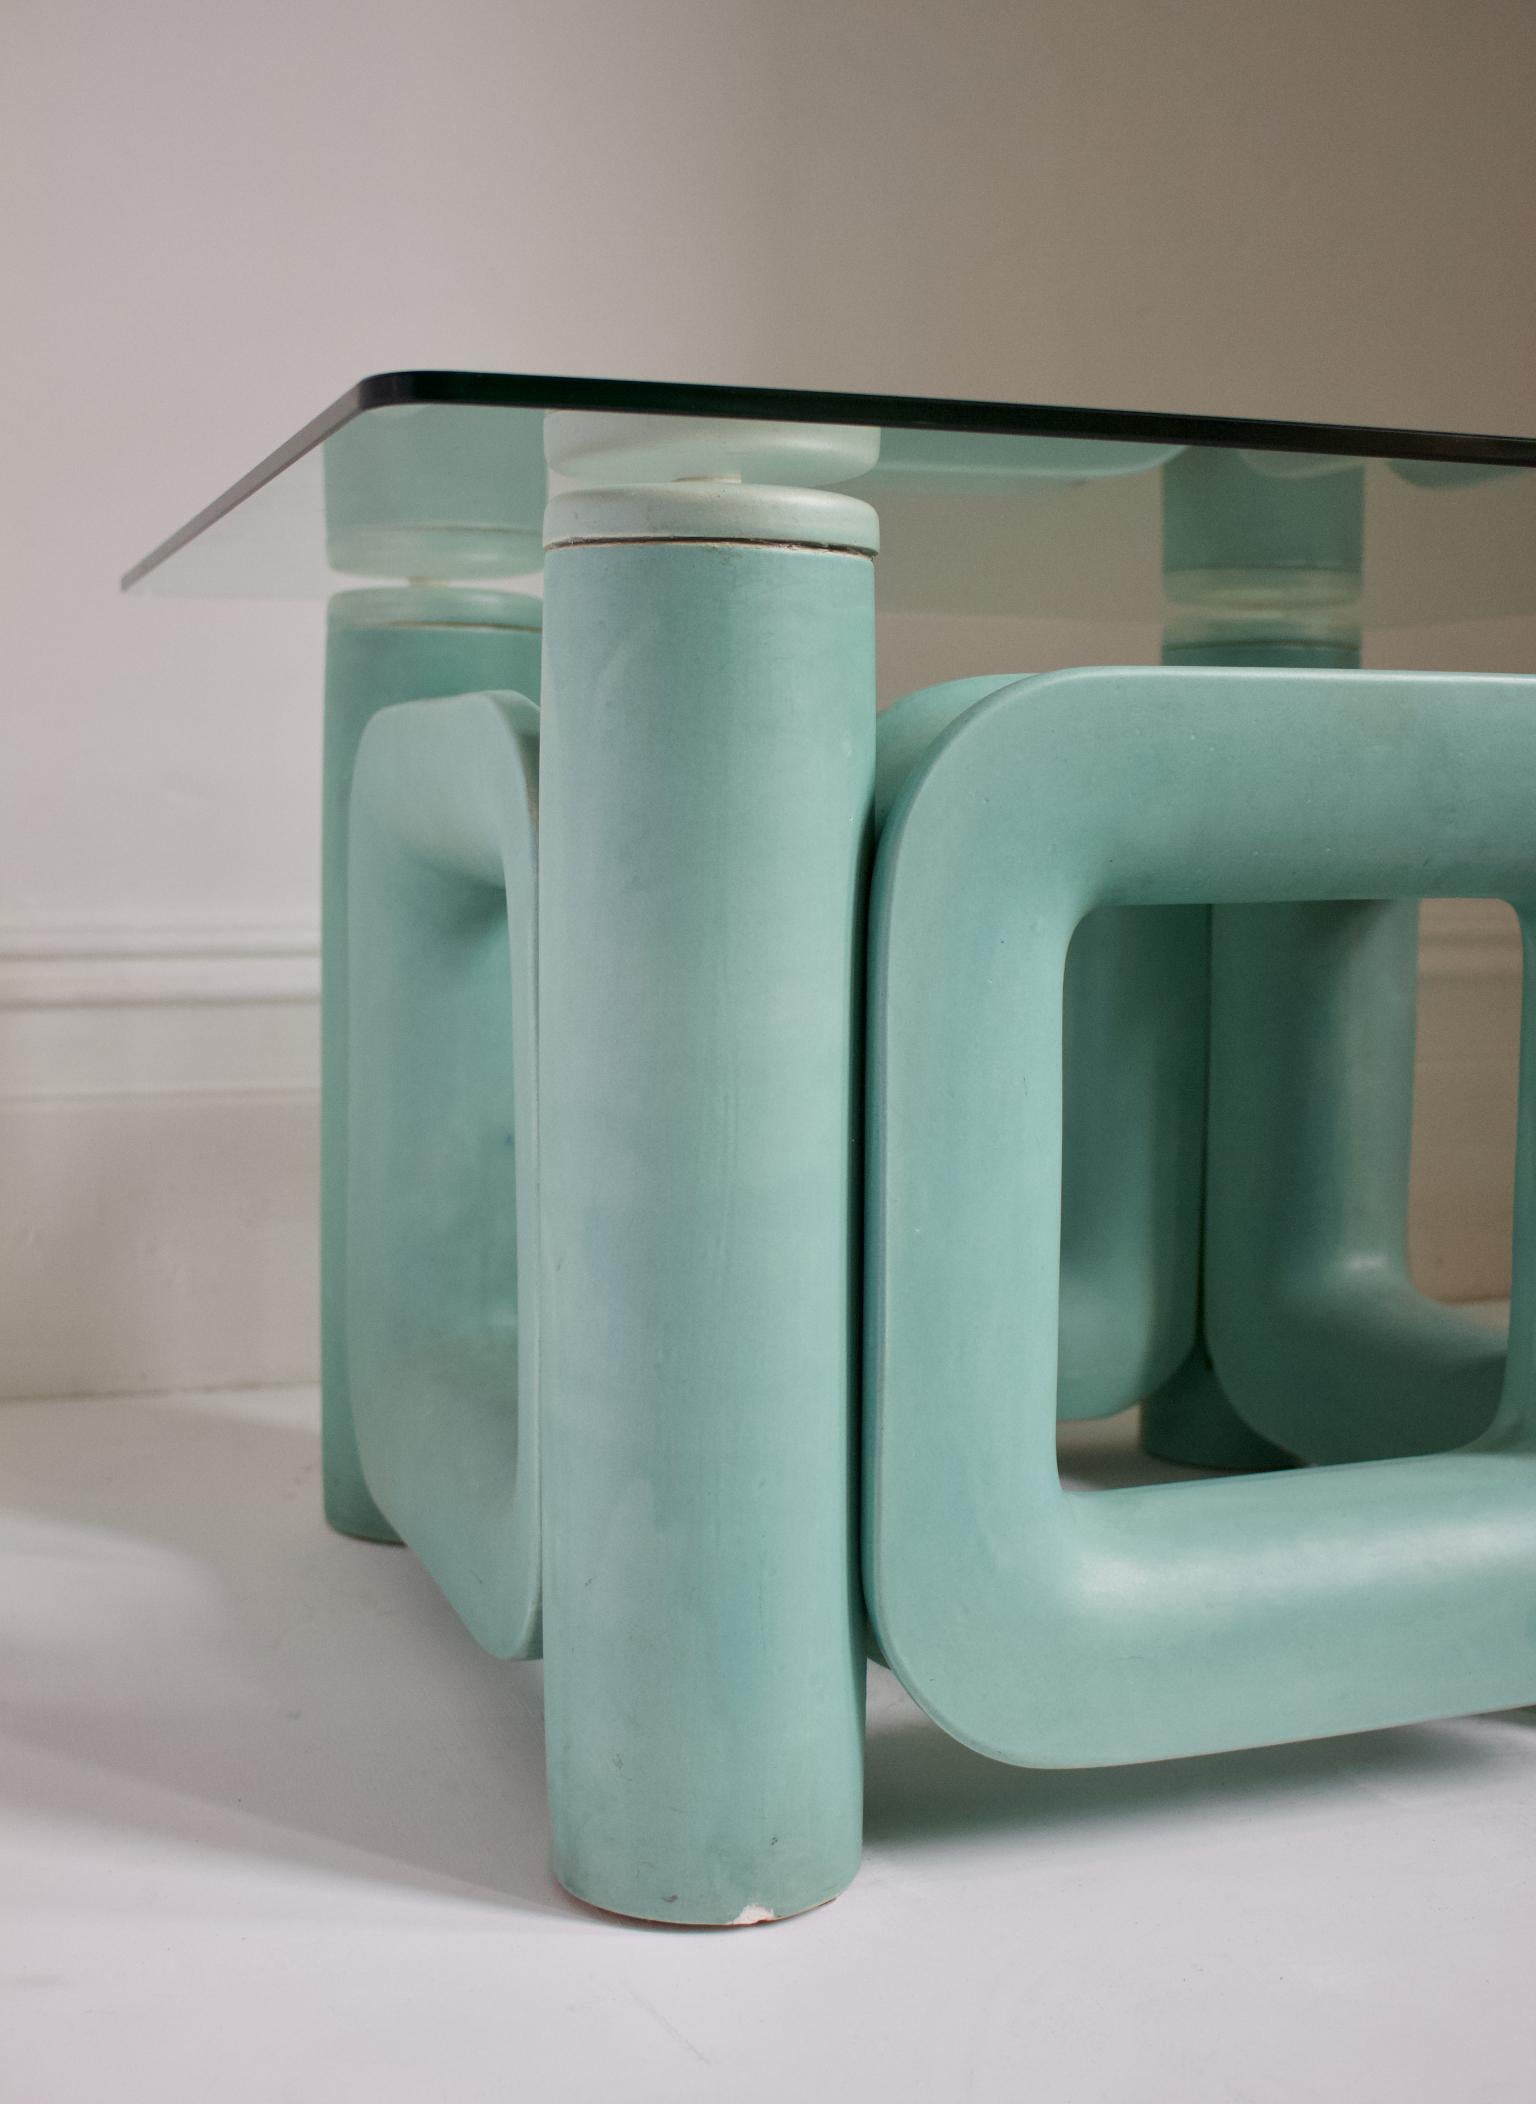 Italian Sculptural Ceramic Coffee Table with Blue-Turquoise Satin Glaze, Italy, 1970s